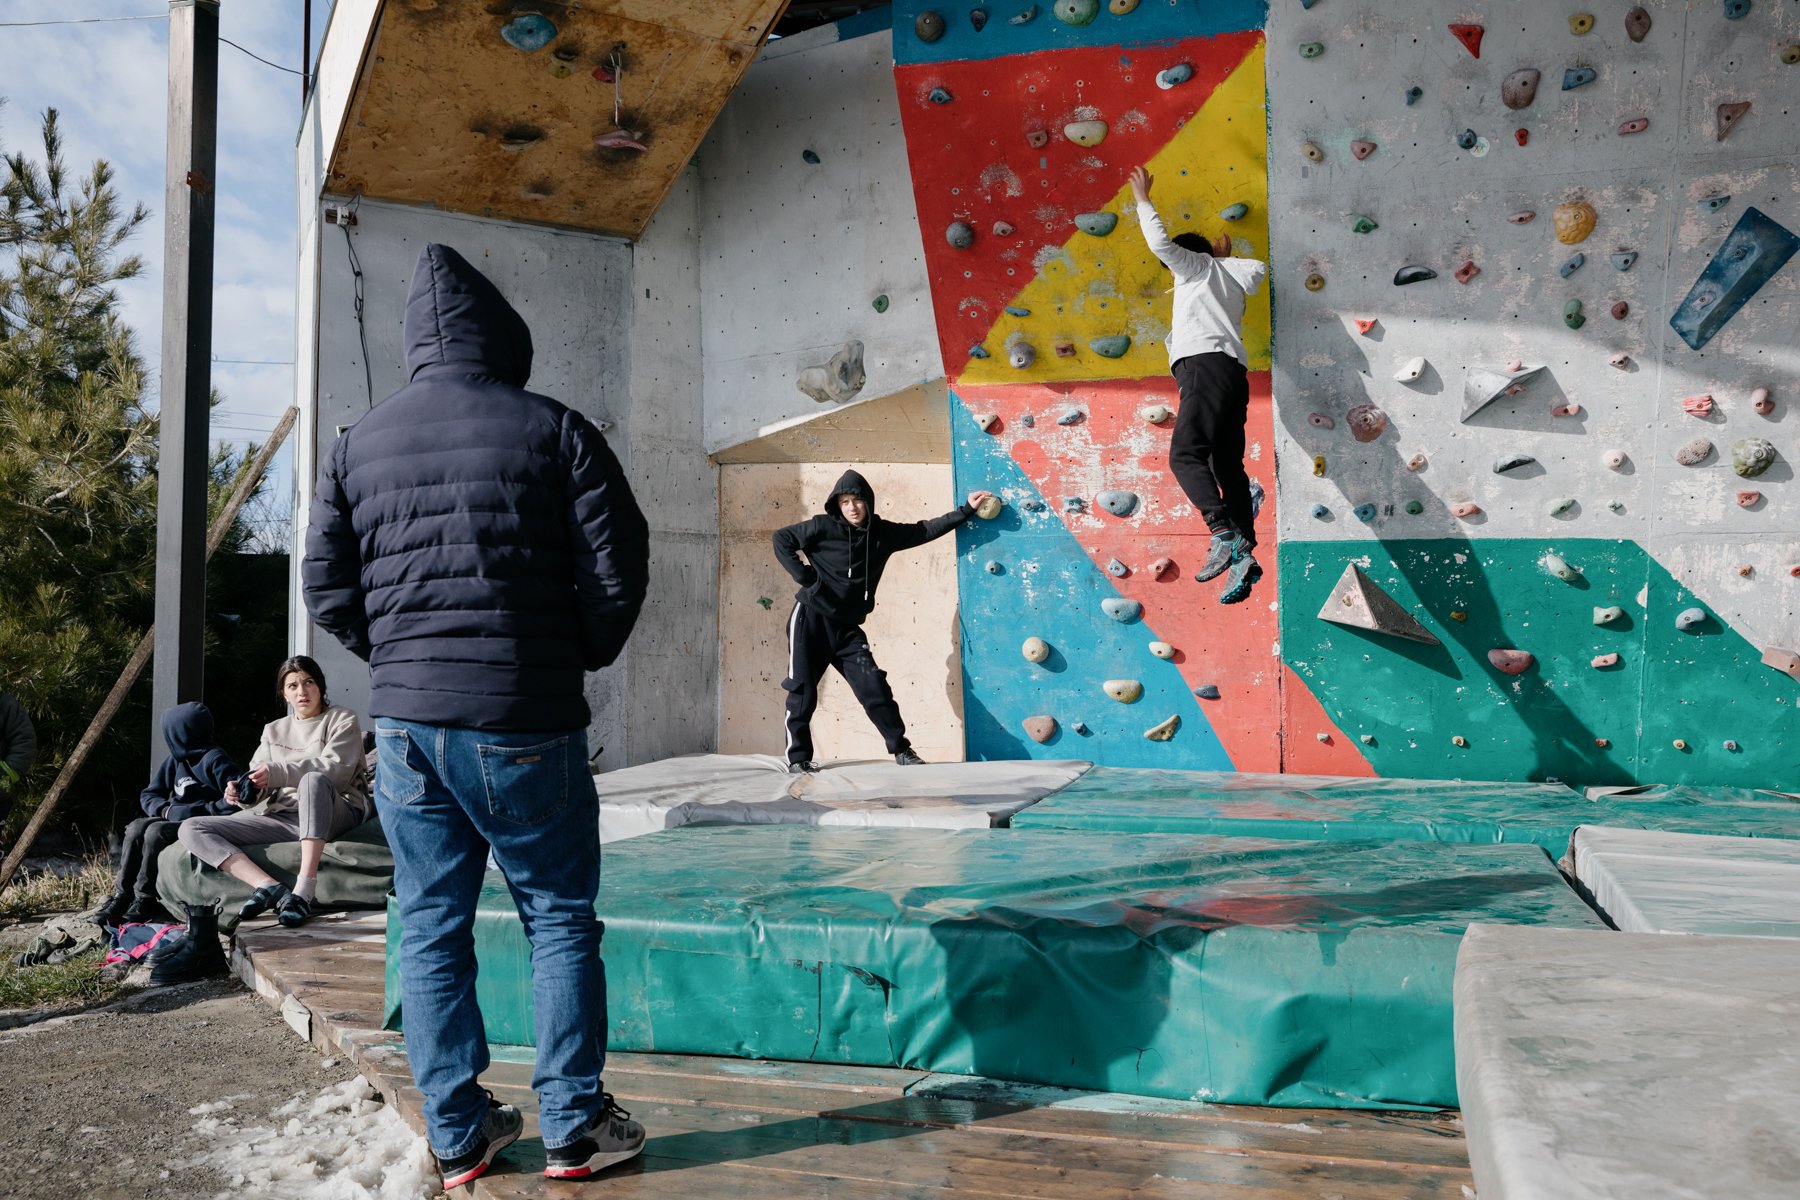  Nikozi Climbing Club provides after-school sessions three times per week for children living in the area. 